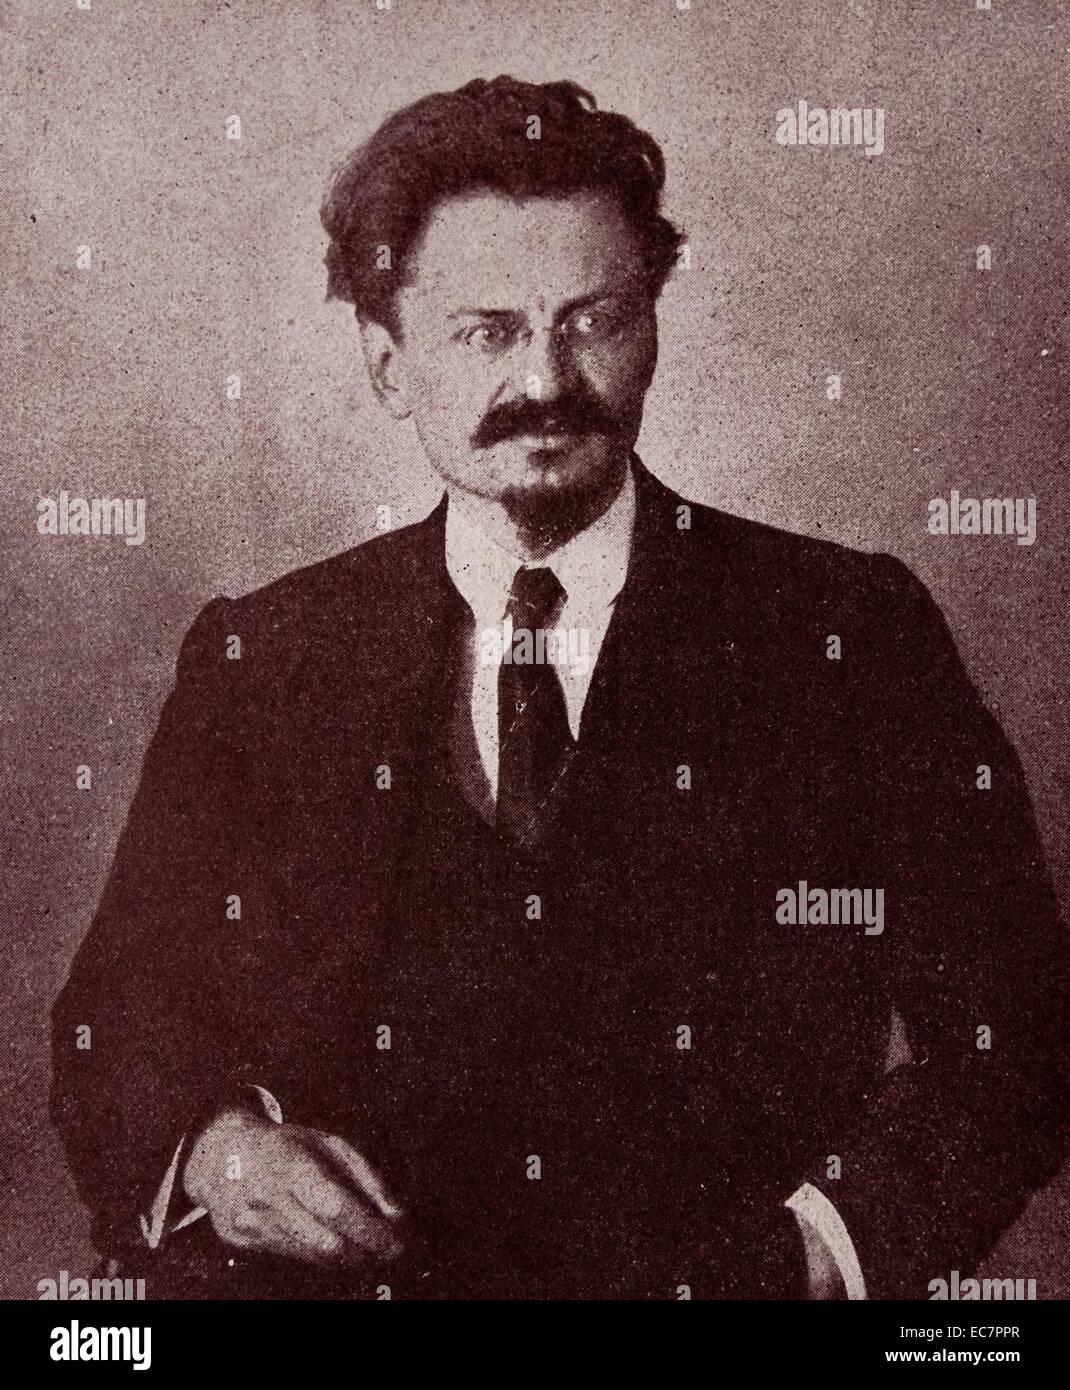 Leon Trotsky 1879 – 21 August 1940. Russian Marxist revolutionary and theorist, Soviet politician, and the founder and first leader of the Red Army. Stock Photo